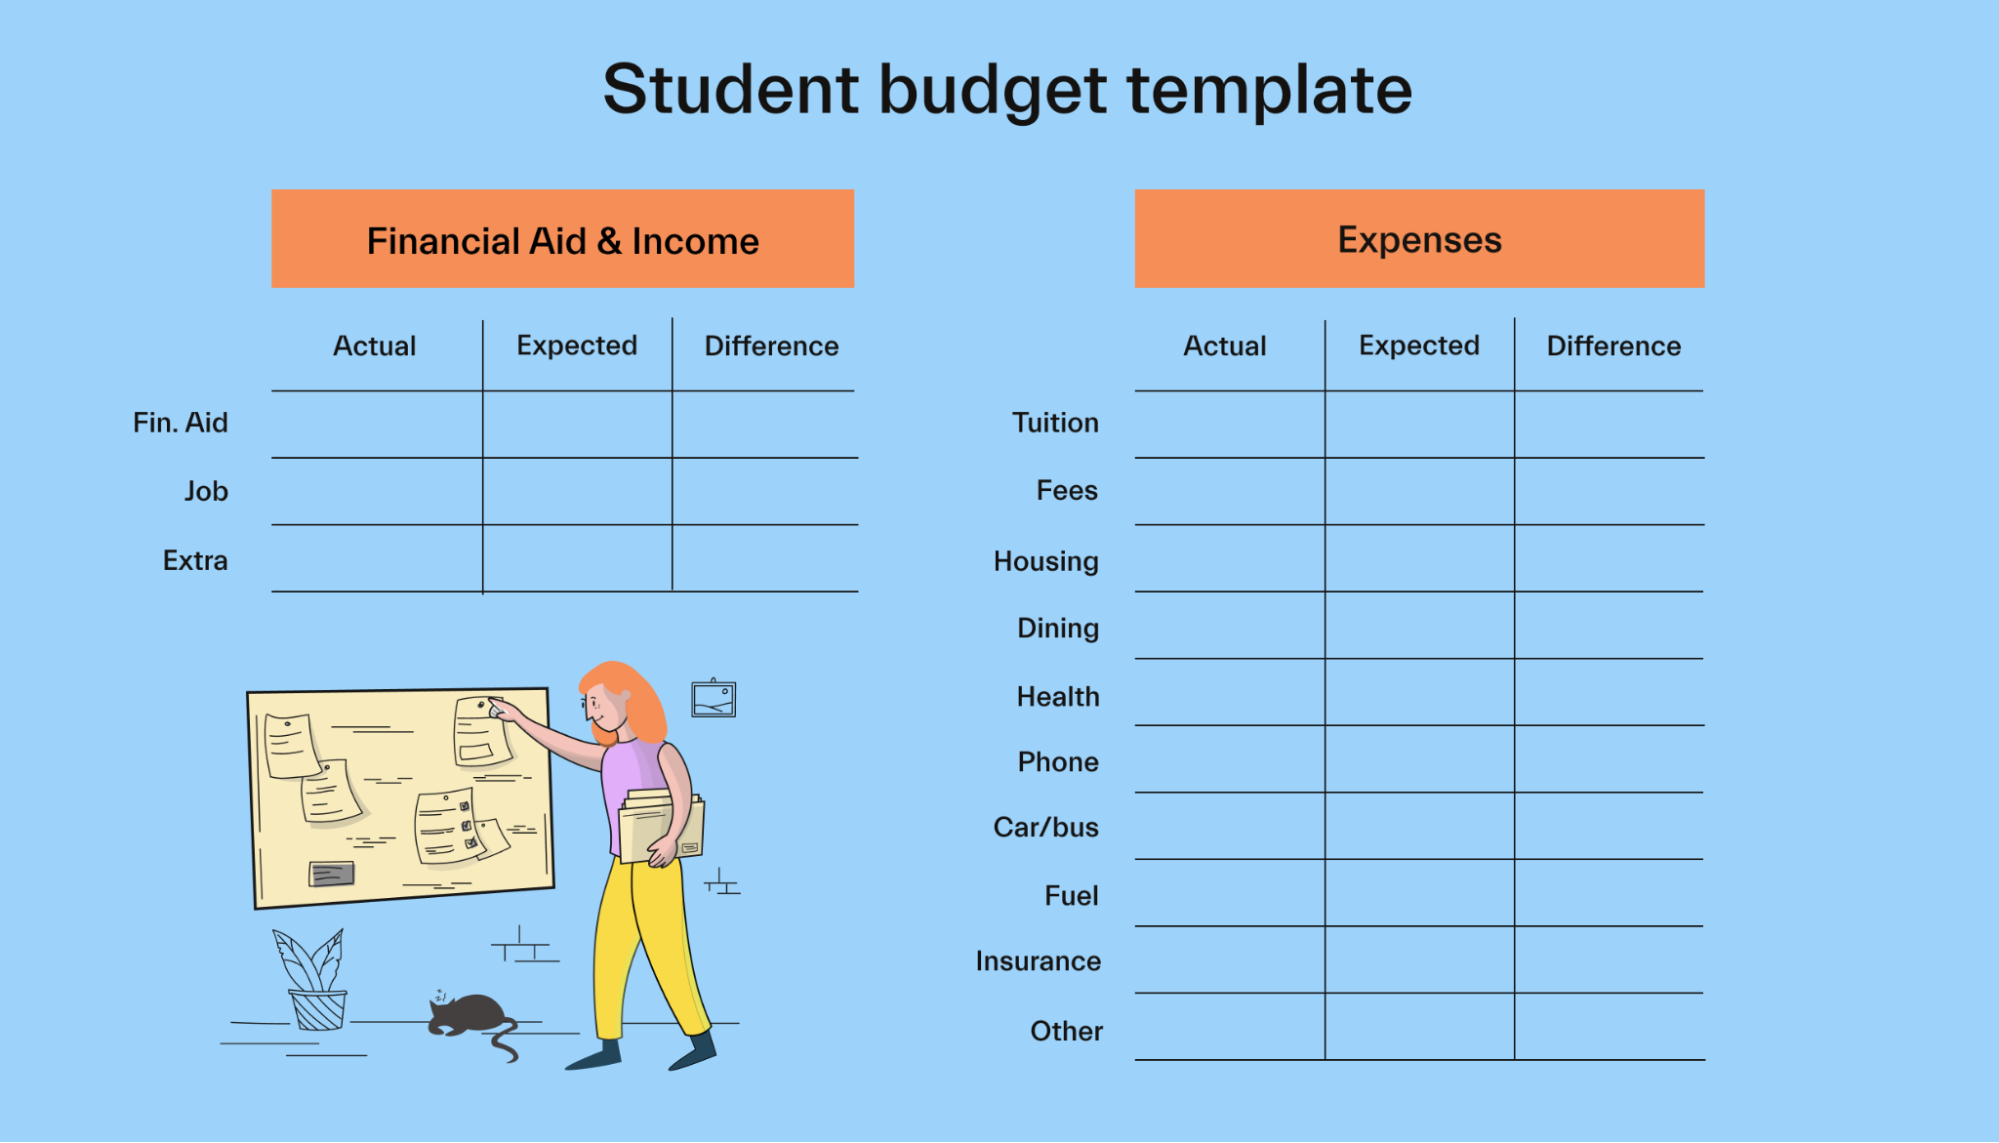 Student budget template